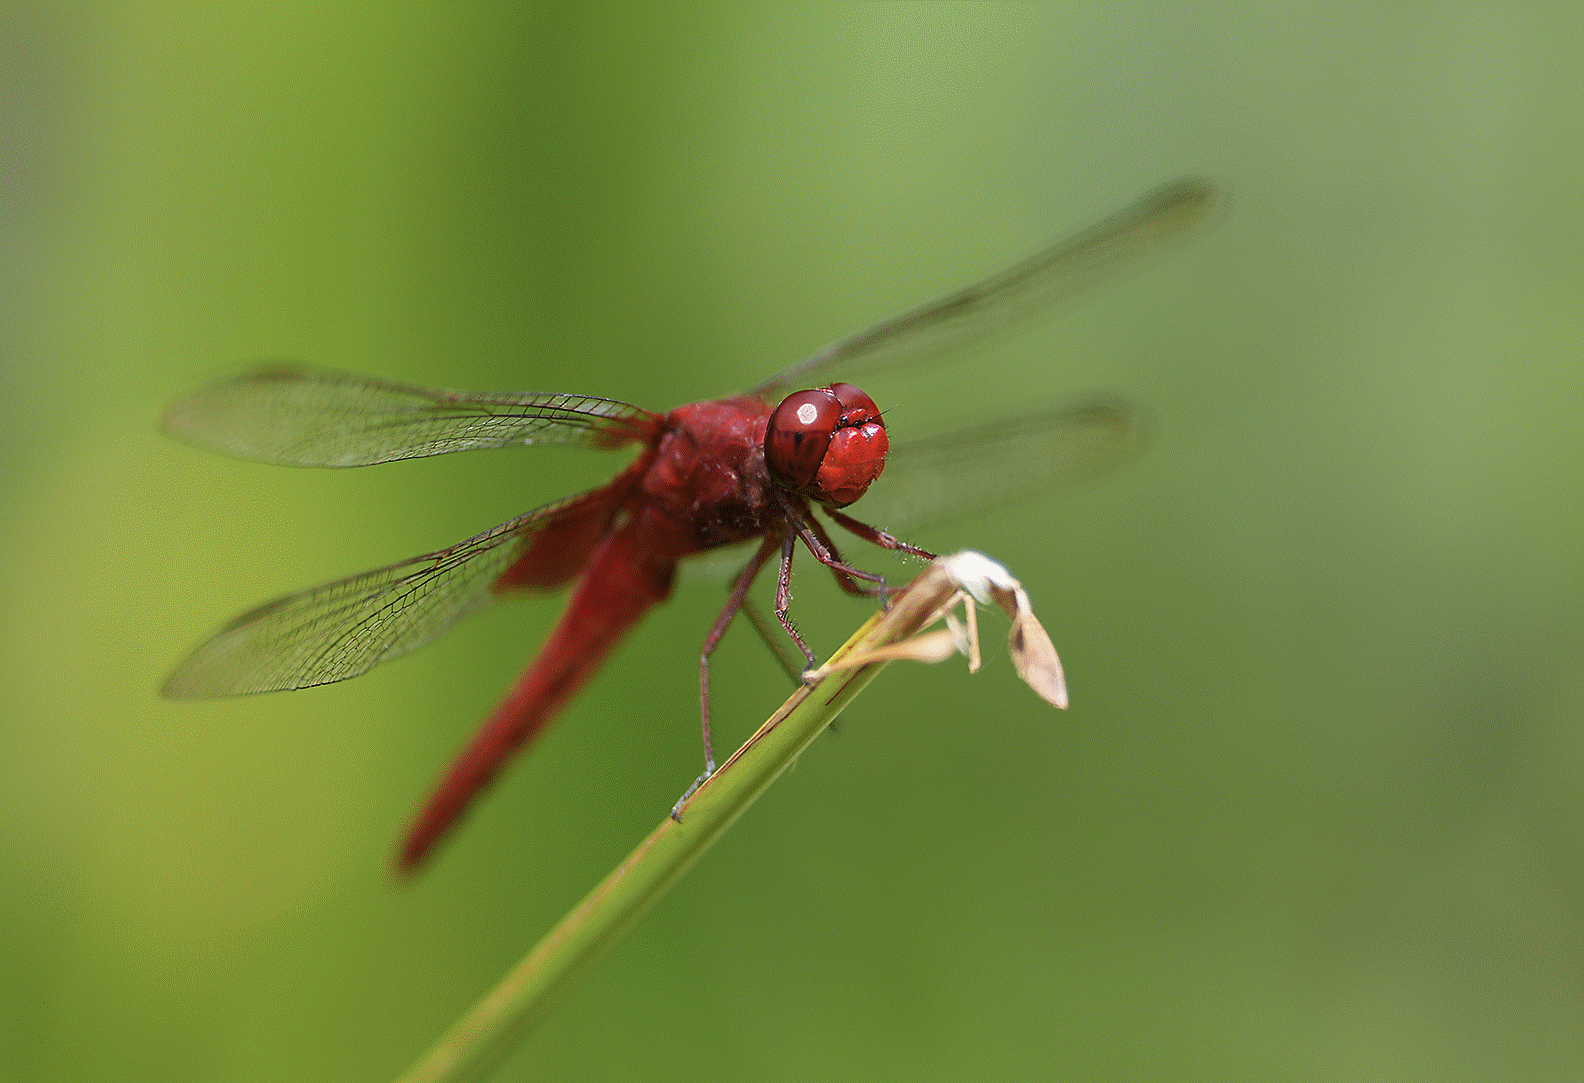 Image of a dragonfly on a tree branch